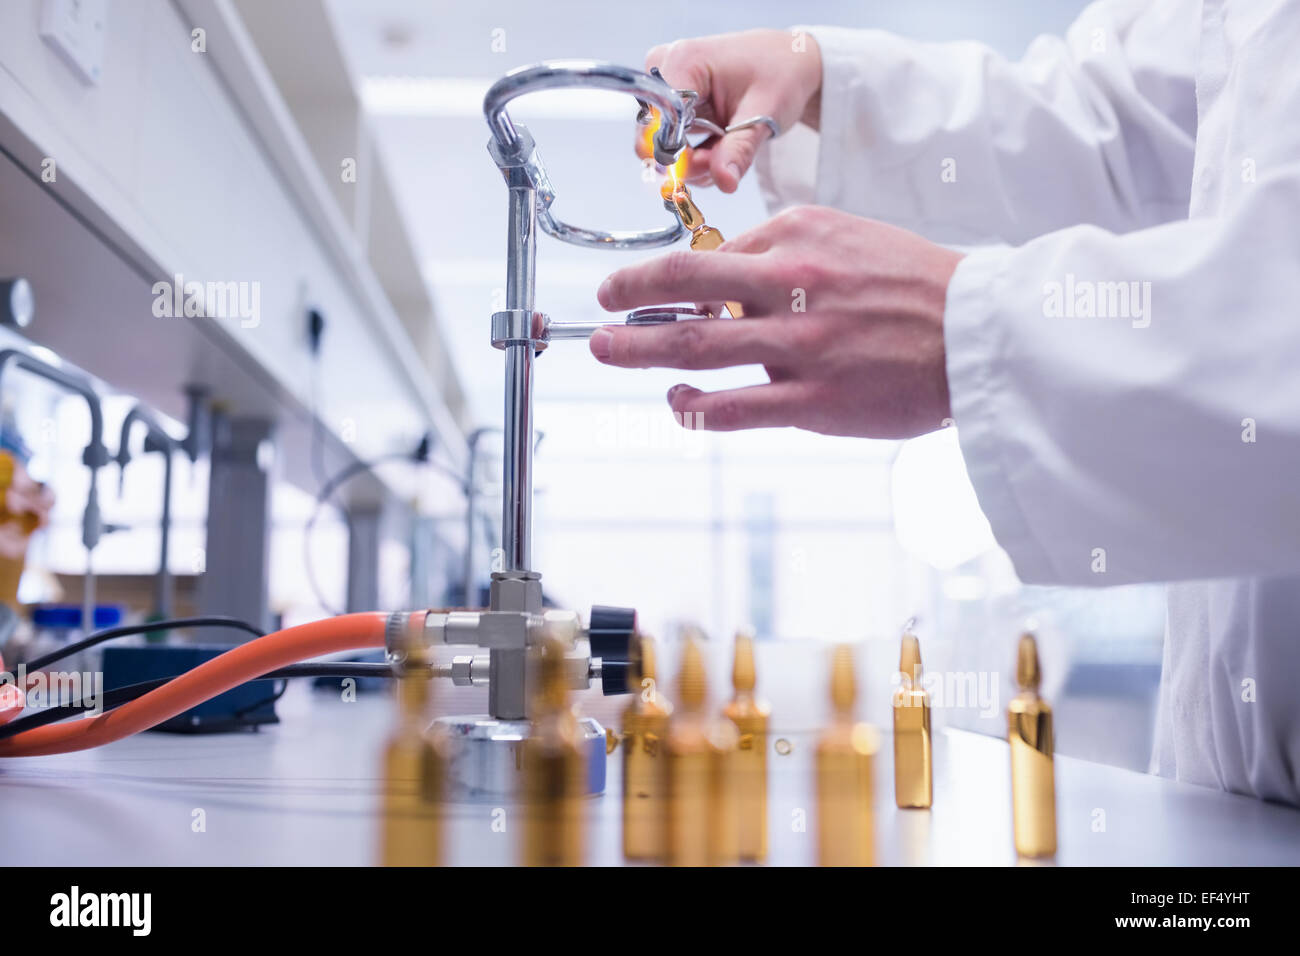 Close up of a biochemist sealing a vial Stock Photo